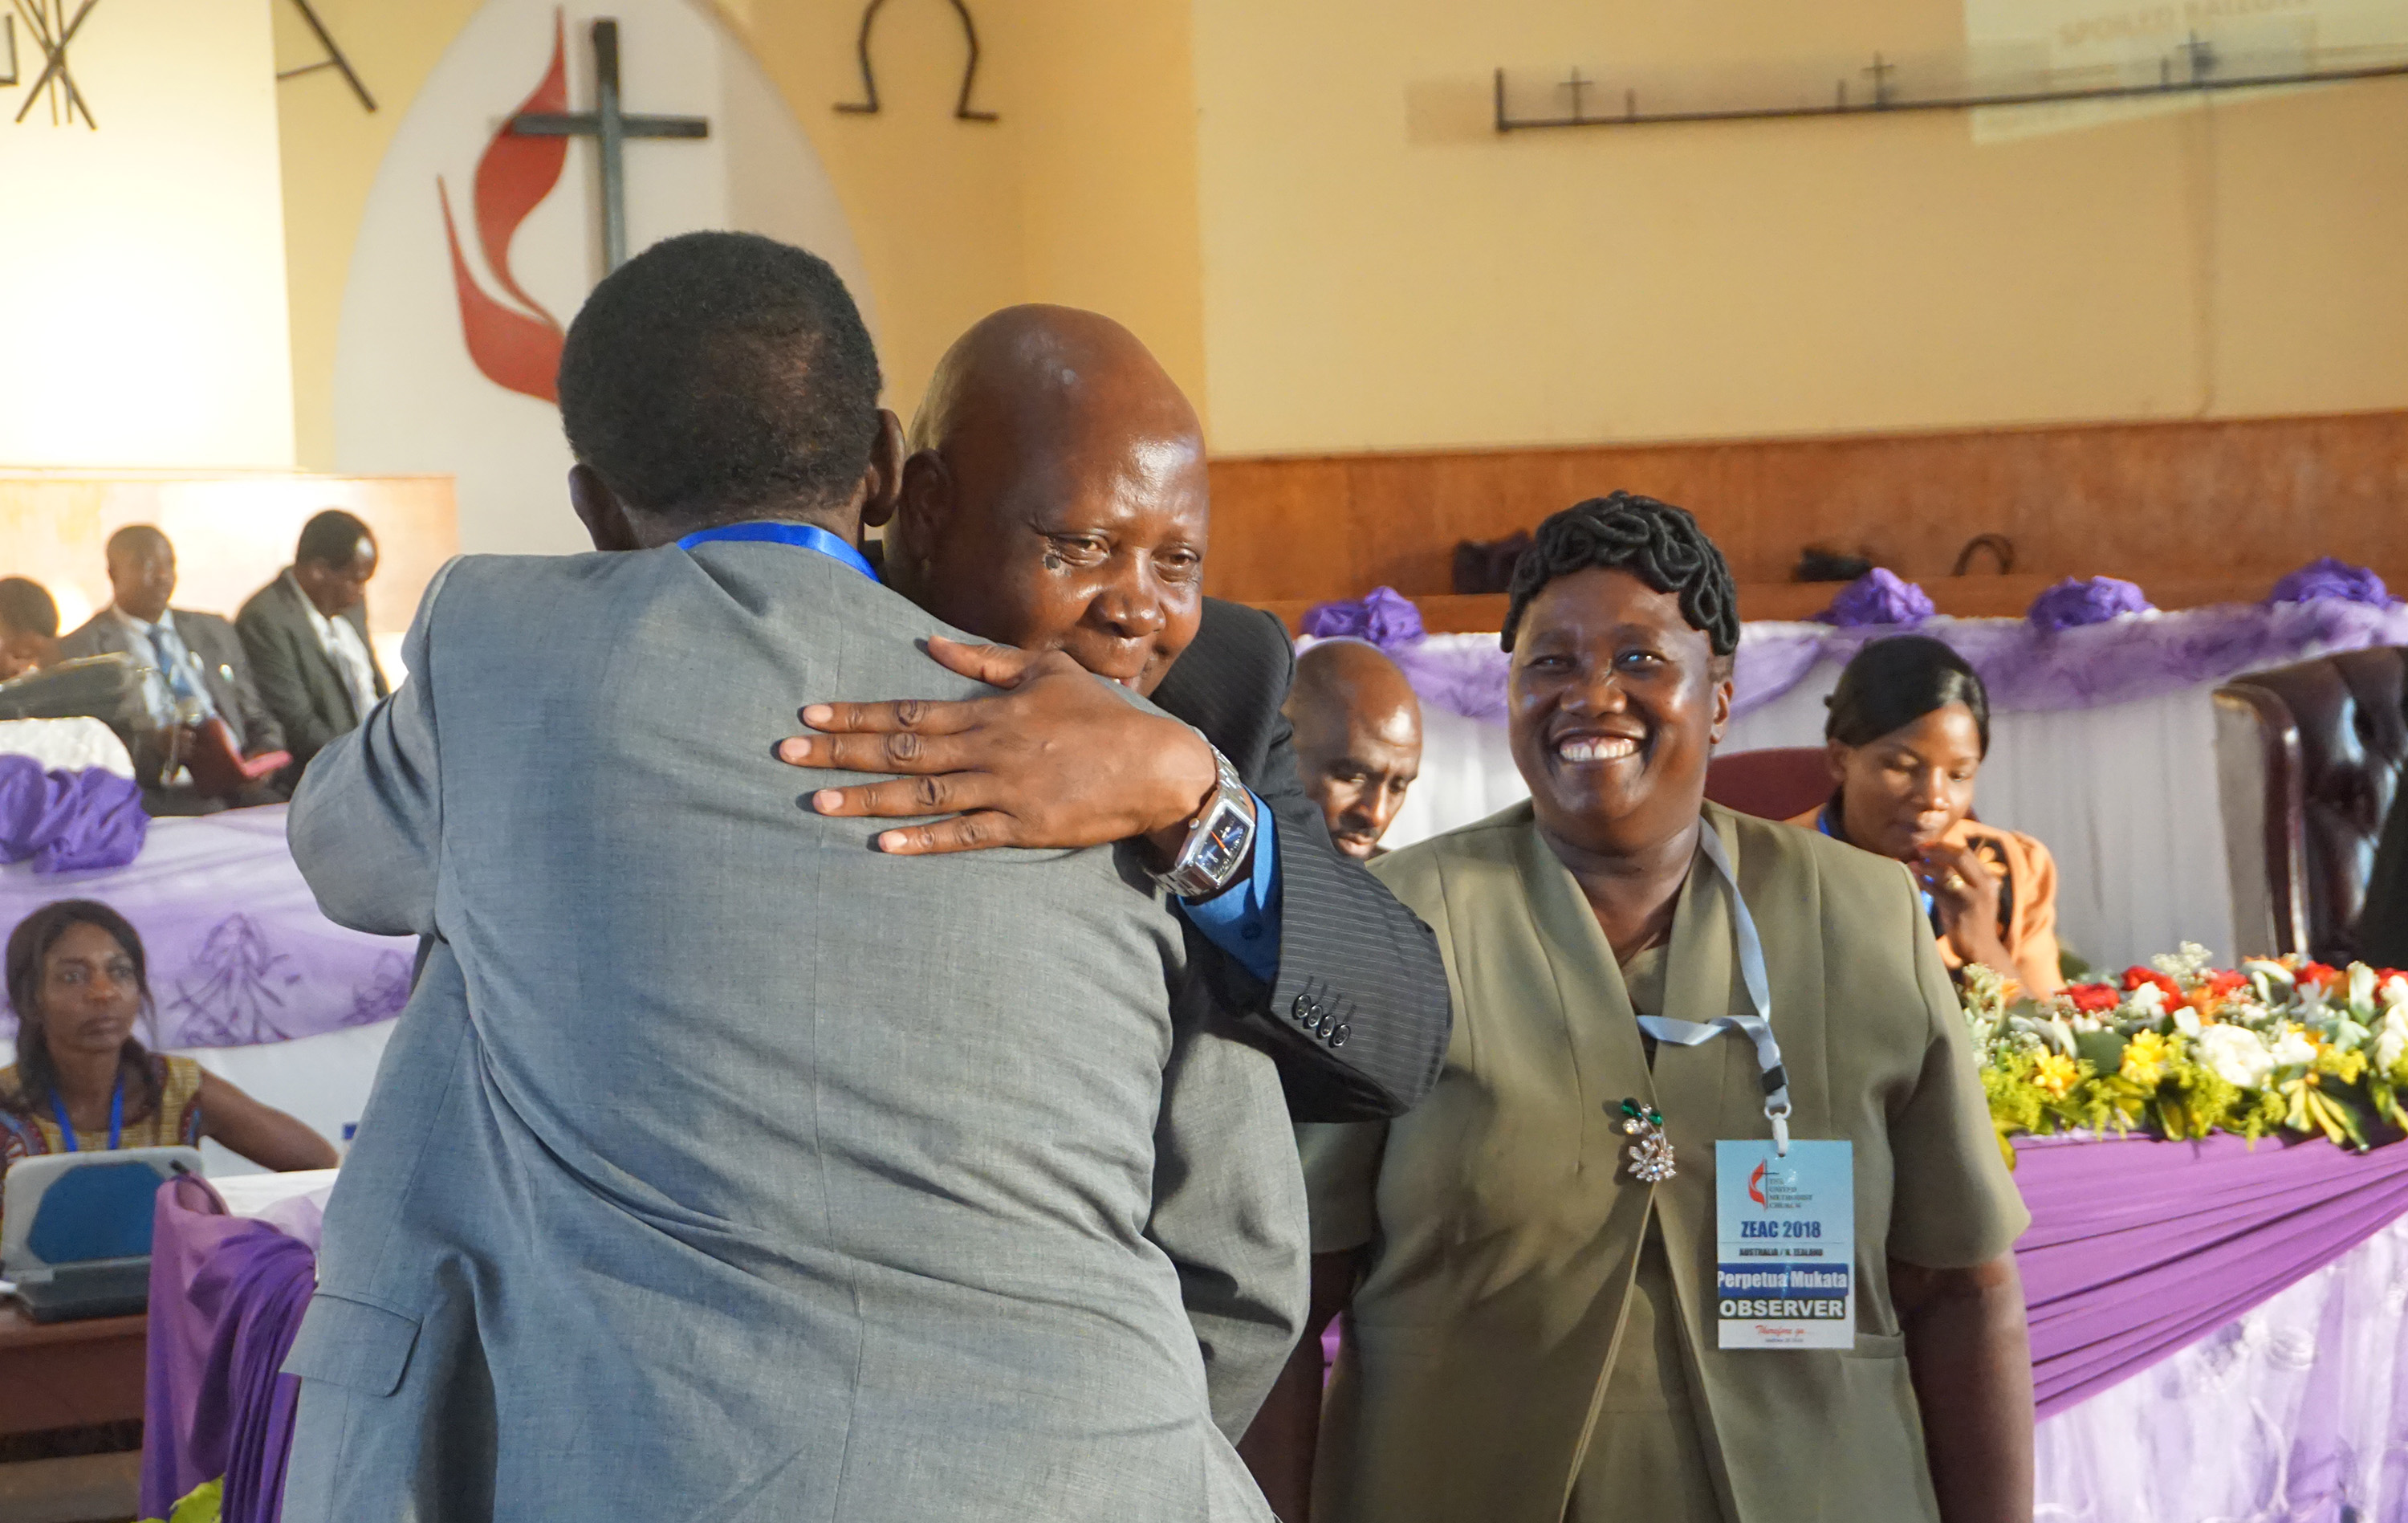 The Rev. Josephat Banda congratulates his new district superintendent of diaspora, The Rev. Stephen Mukata (center), as Mukata’s wife, Perpetua Mukata, looks on at Old Mutare Mission in Mutare, Zimbabwe, during his appointment in 2018. Mukata oversees diaspora in the United Kingdom, Australia, New Zealand and Canada. Photo by Kudzai Chingwe, UM News.